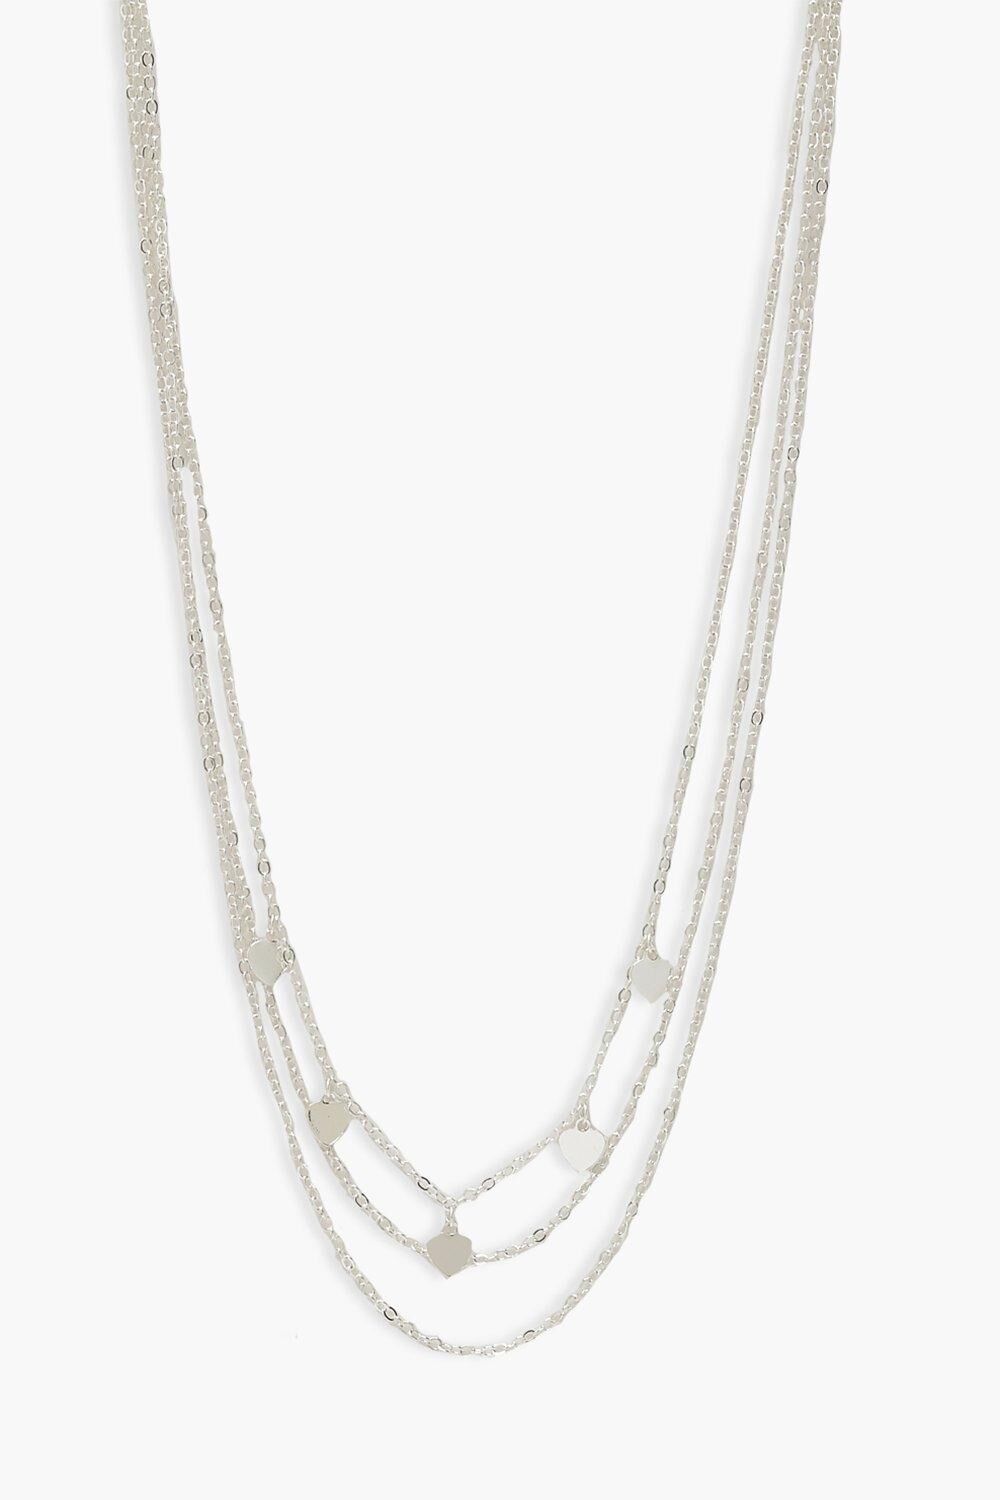 Boohoo Multi Heart Chain Necklace- Grey  - Size: ONE SIZE